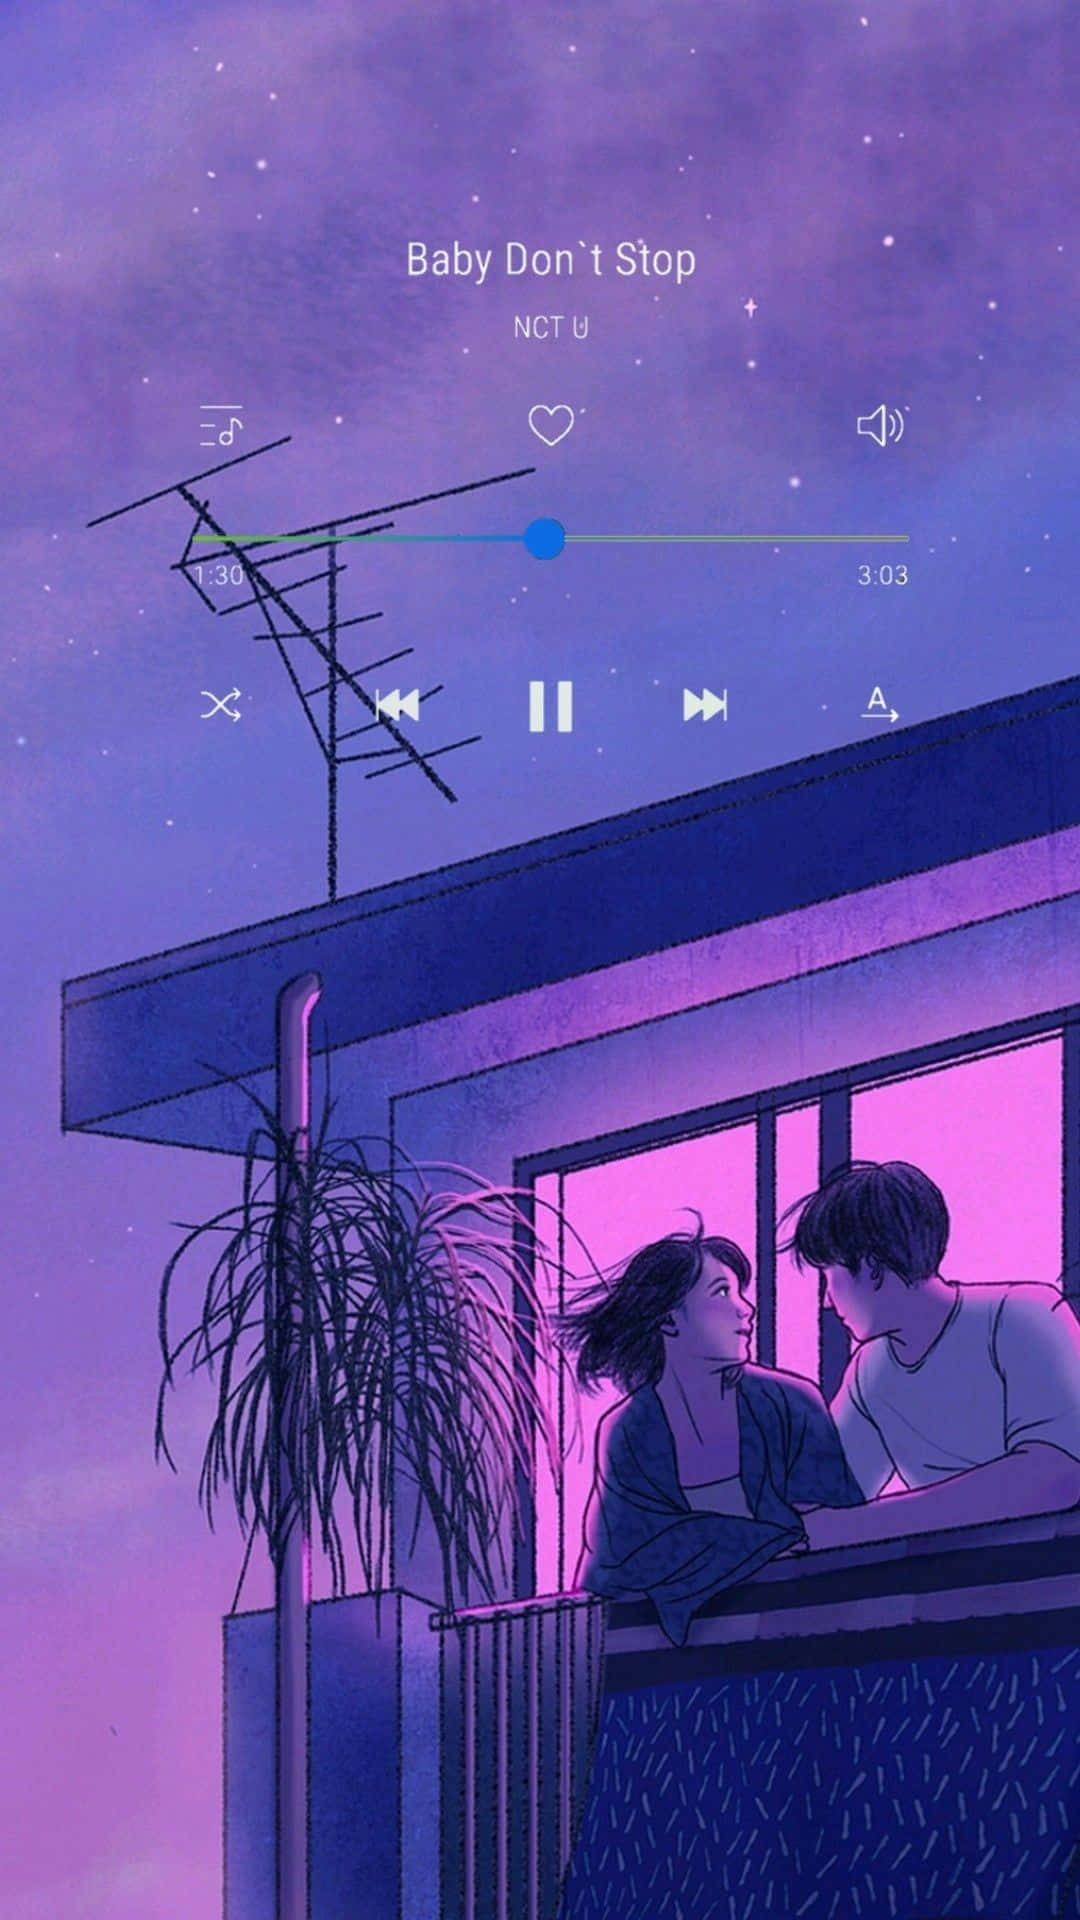 Adorable Anime Couple Embrace Under a Starry Night